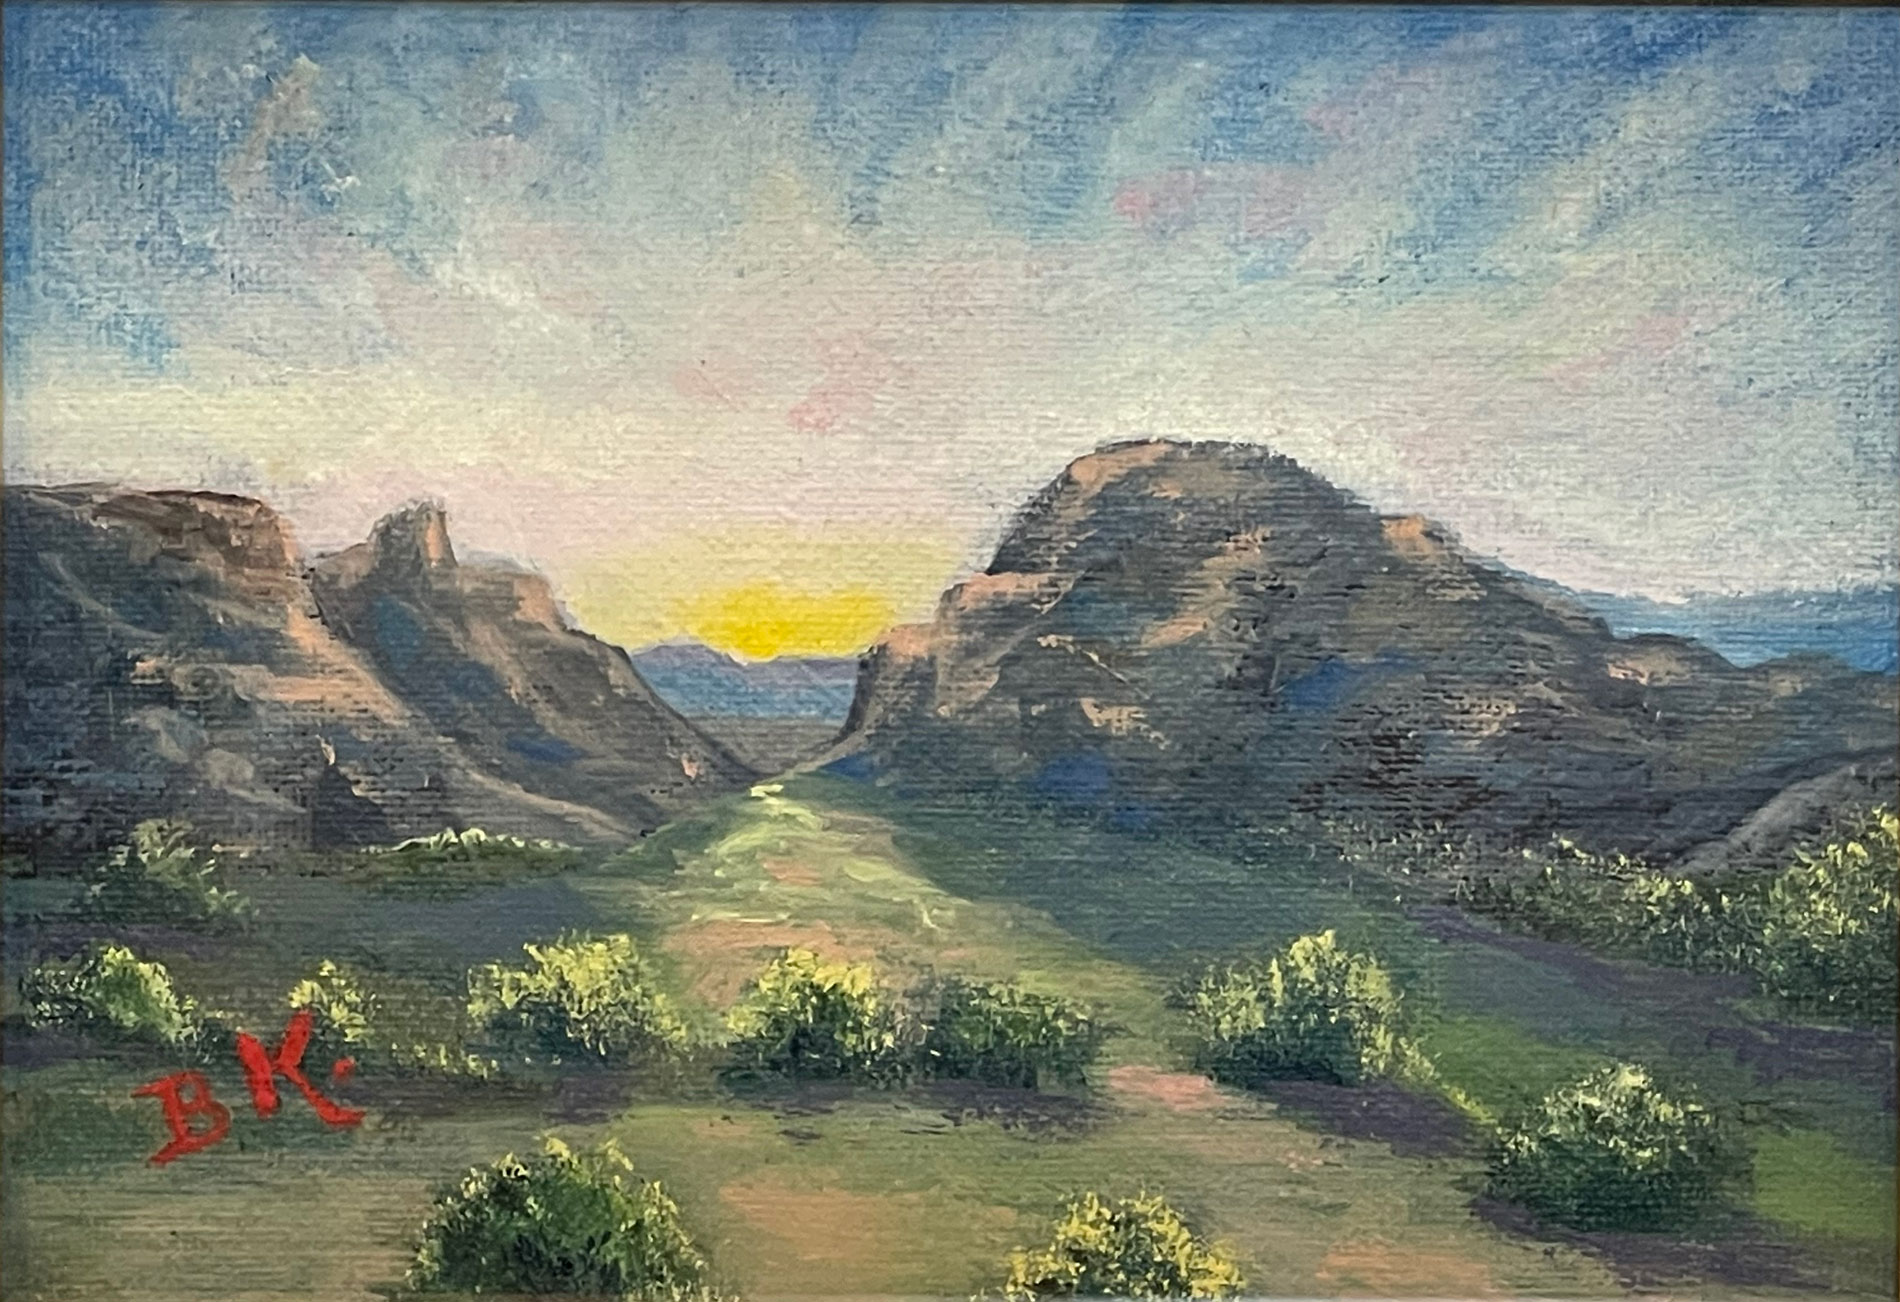 Oil Painting of a sun setting between two mountains in the Big Bend National Park. Painted by B.K. Dennis of Alpine, TX.